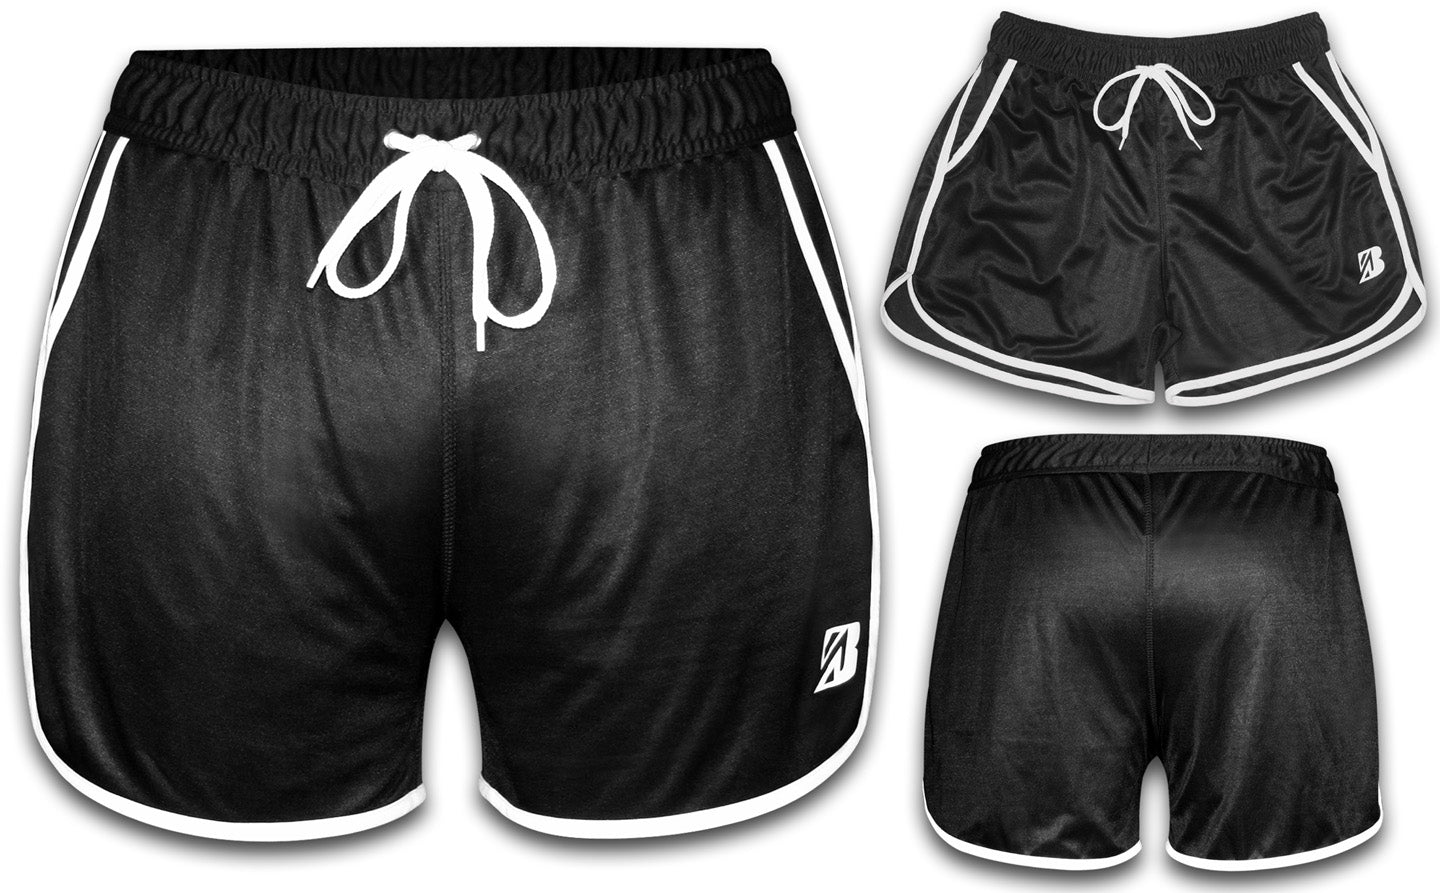 Elevate Your Fitness in Our Sleek Black Gym Shorts - Superior Style, Maximum Performance!